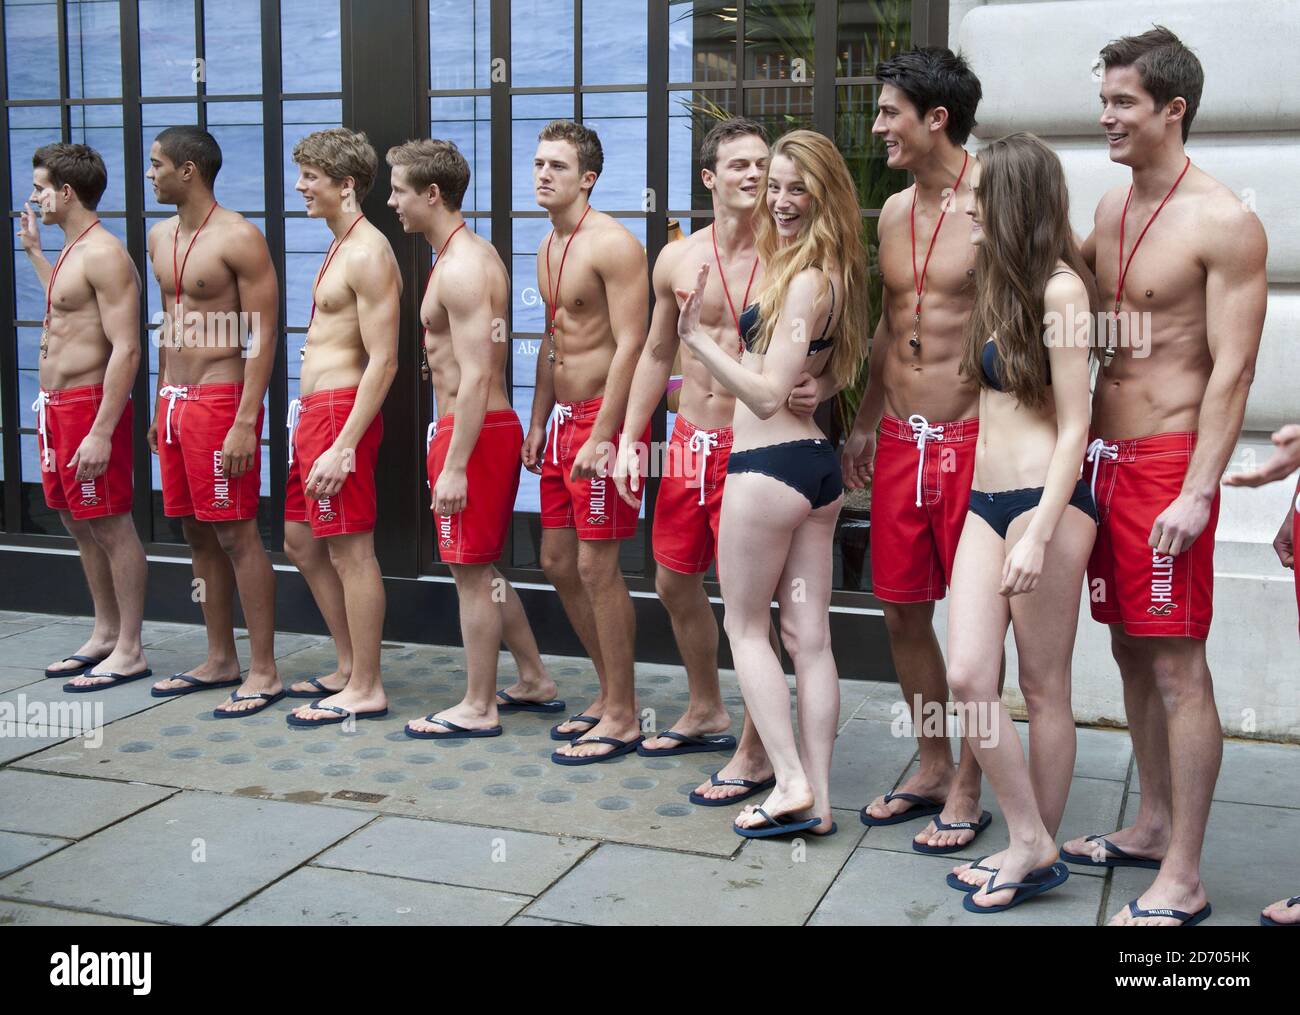 https://c8.alamy.com/comp/2D705HK/models-dressed-as-lifeguards-pictured-as-they-open-the-new-gilly-hicks-and-hollister-flagship-stores-on-regent-street-london-2D705HK.jpg